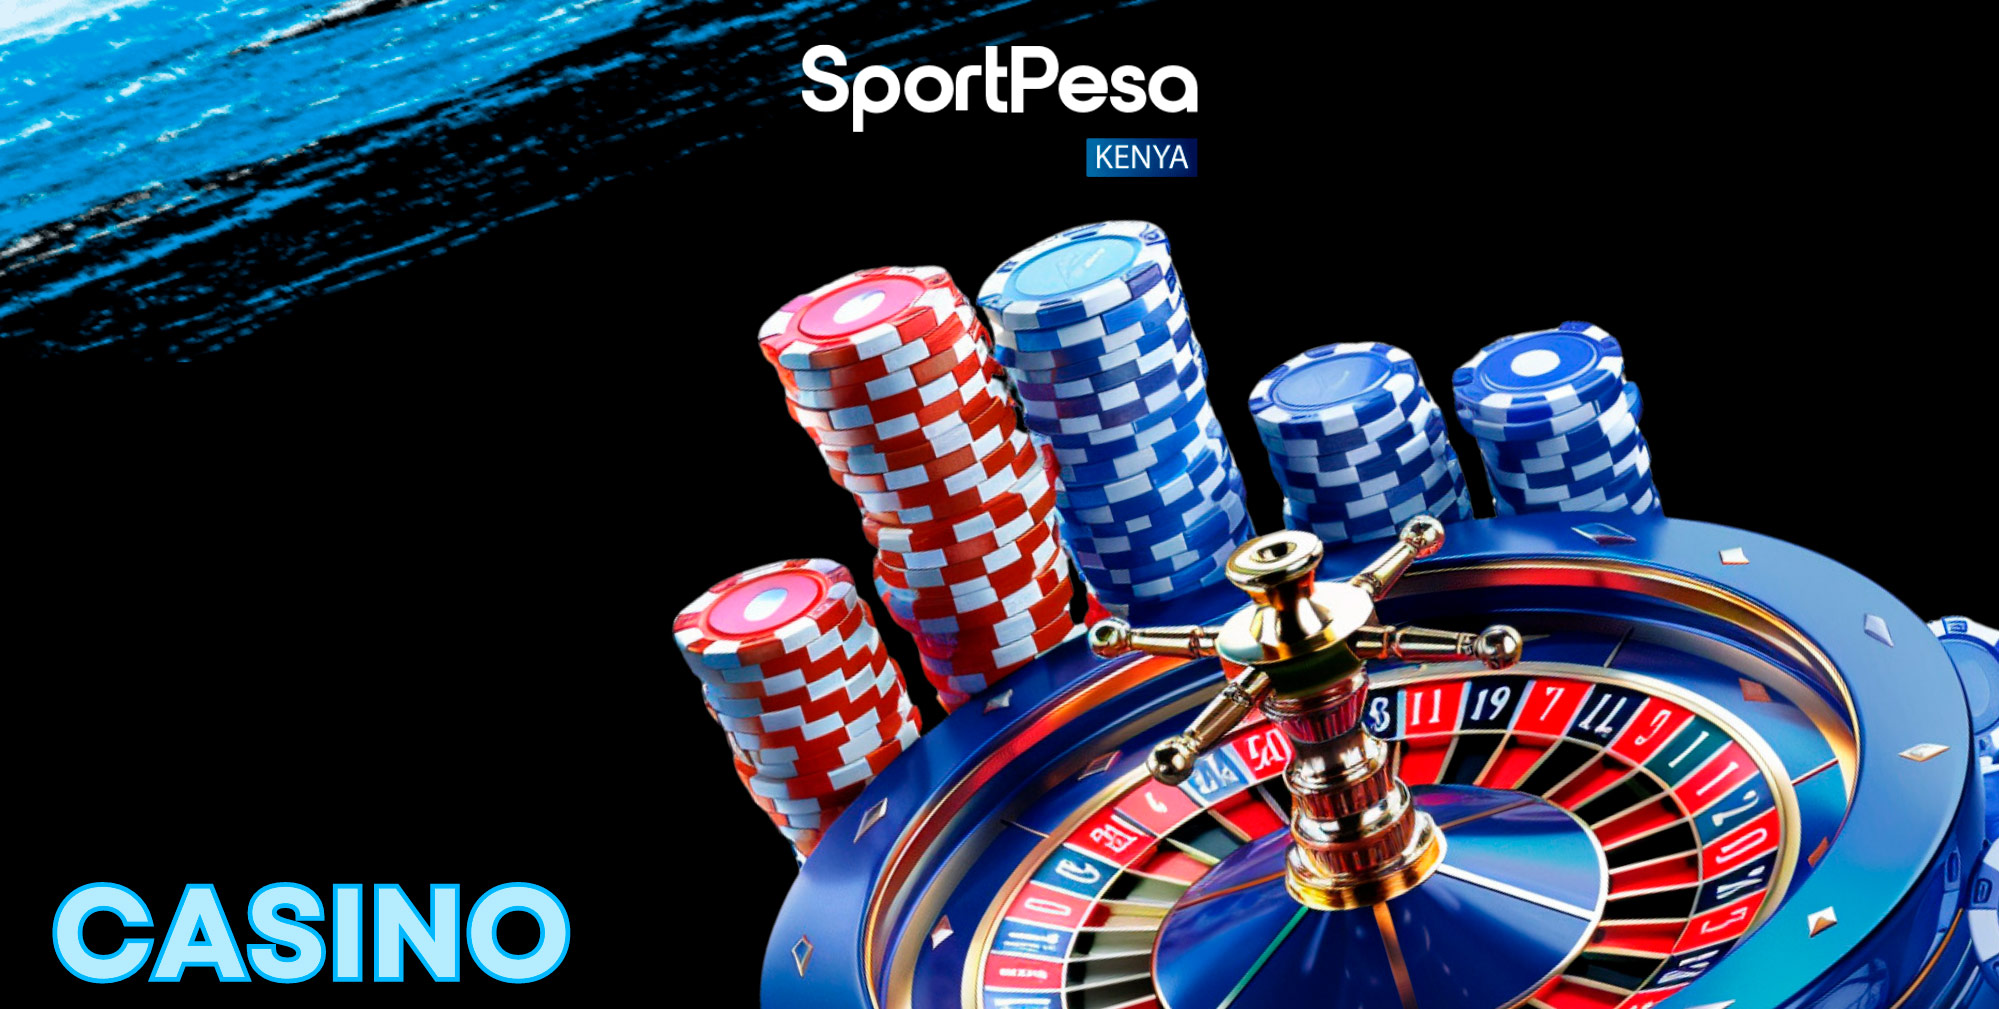 Sportpesa has a casino section with many games